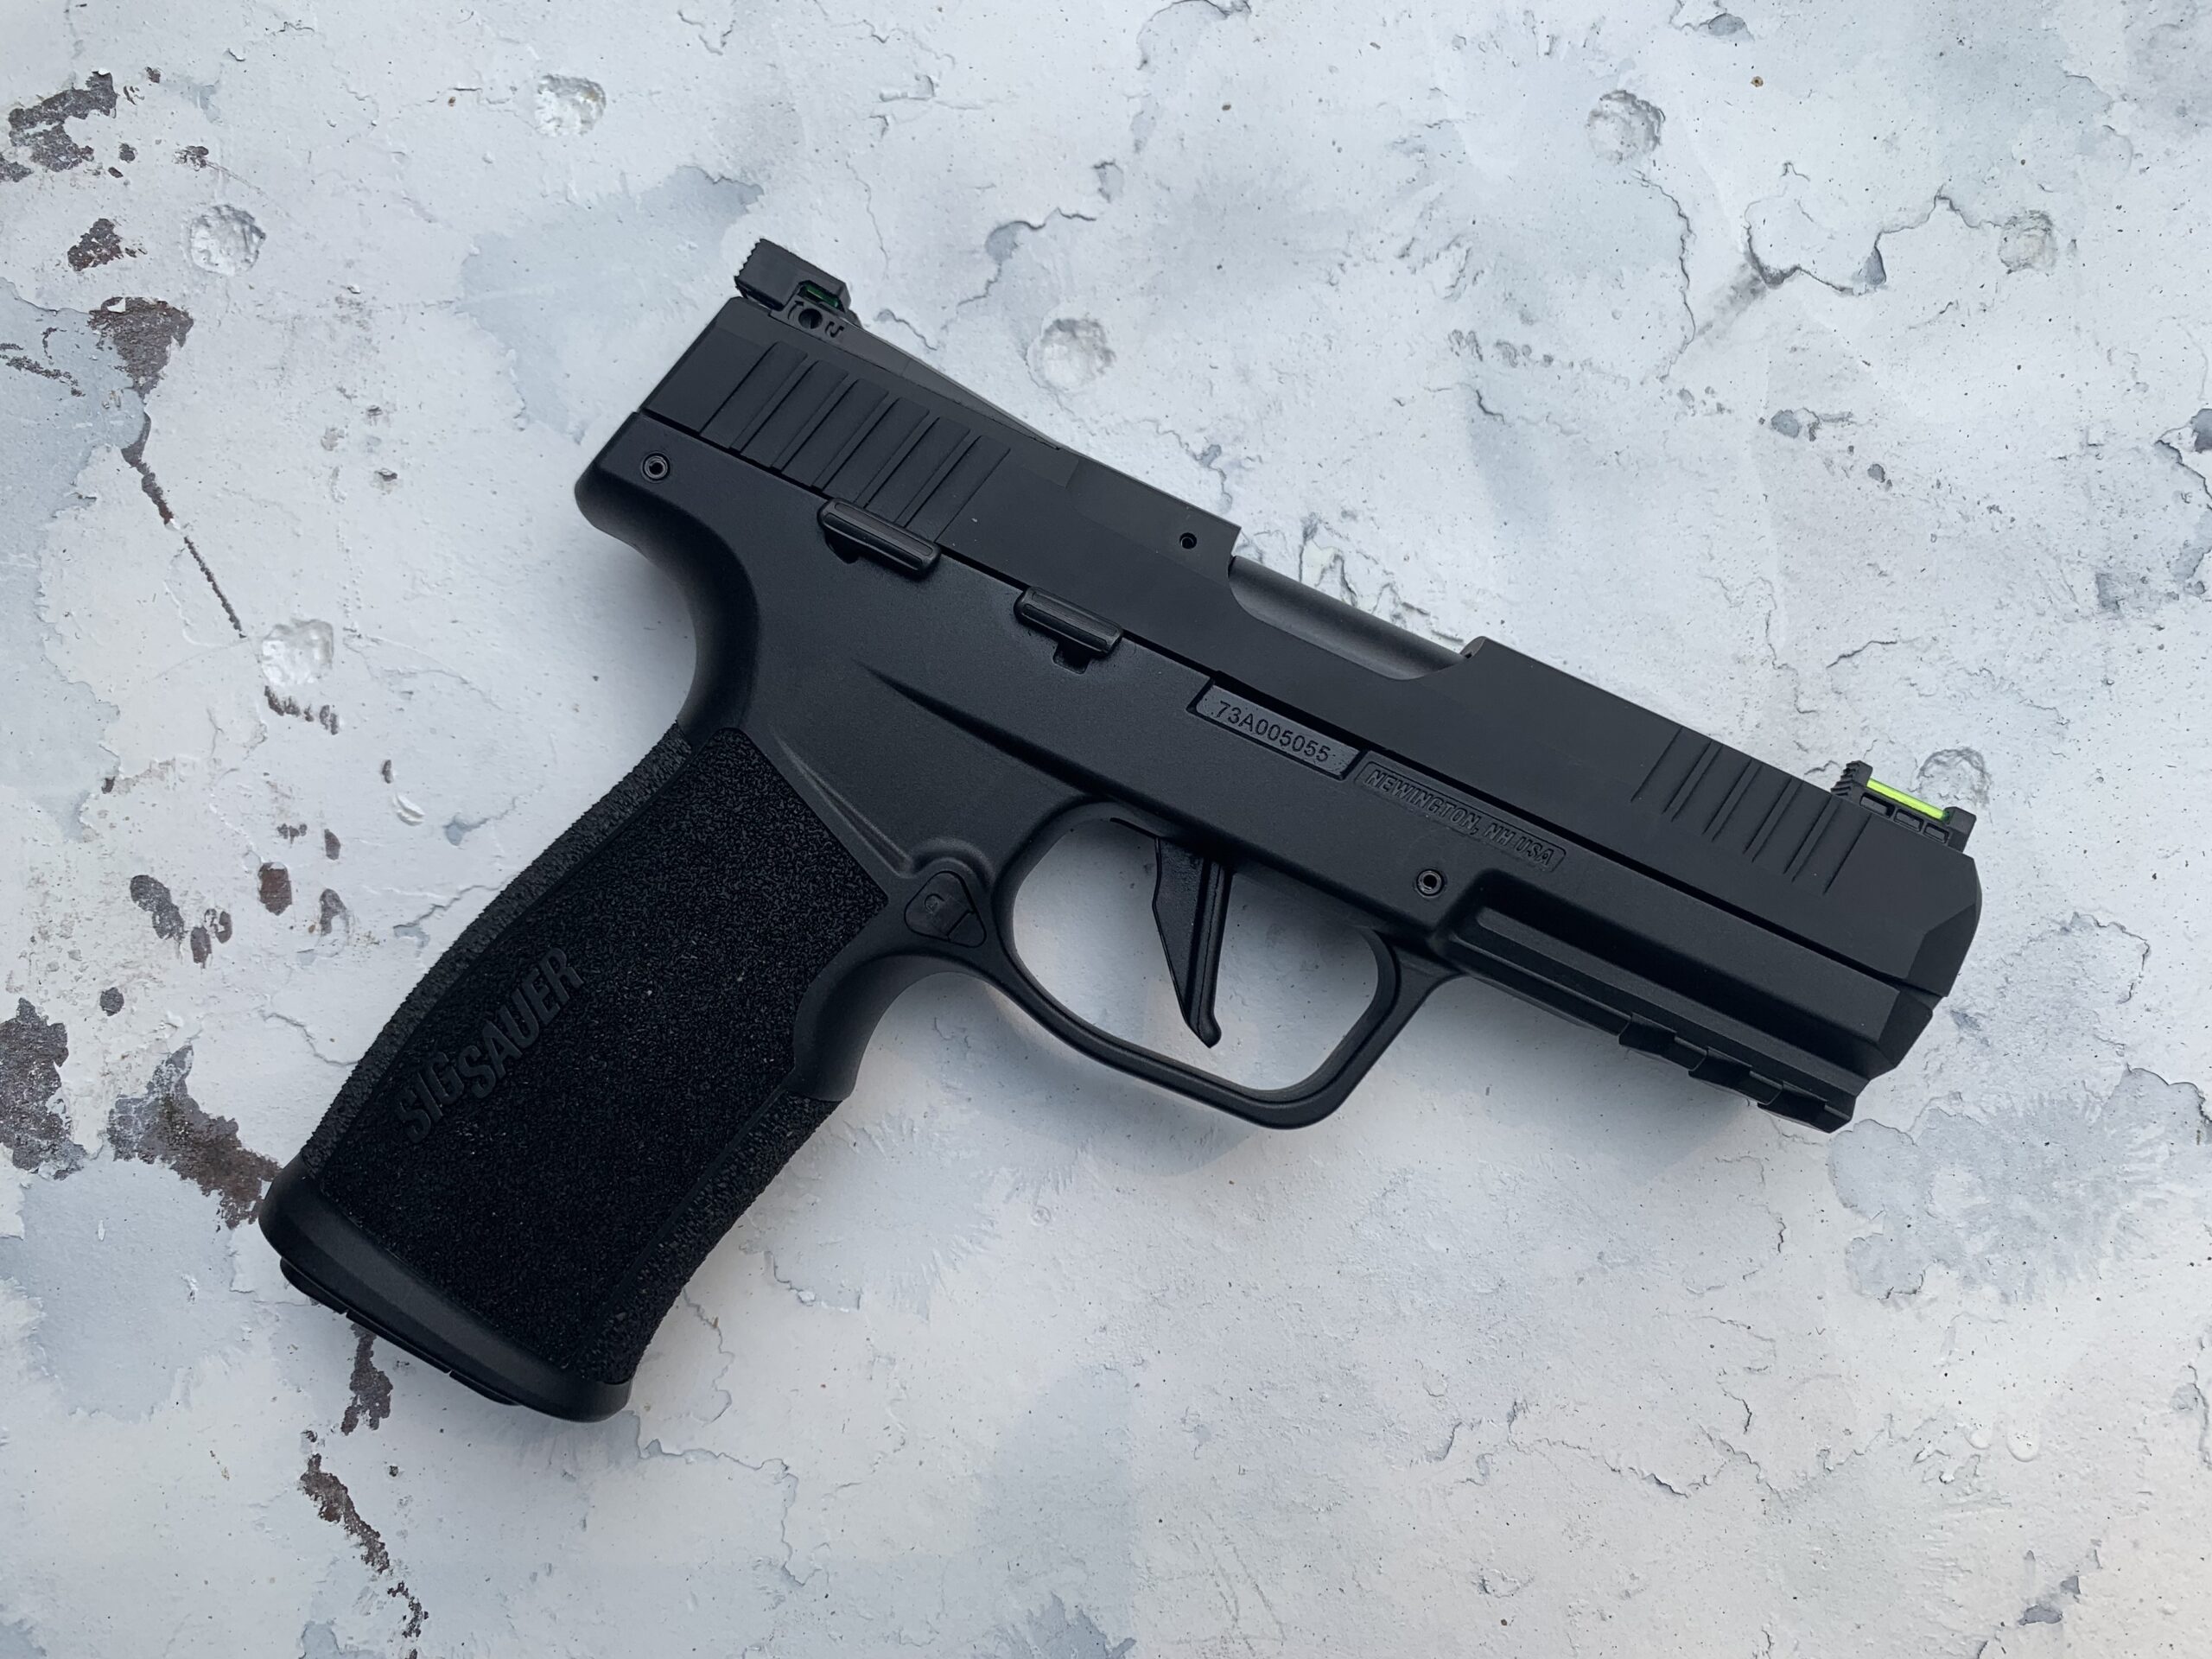 The Sig P322 has a full 3-slot rail and tactile cocking serrations